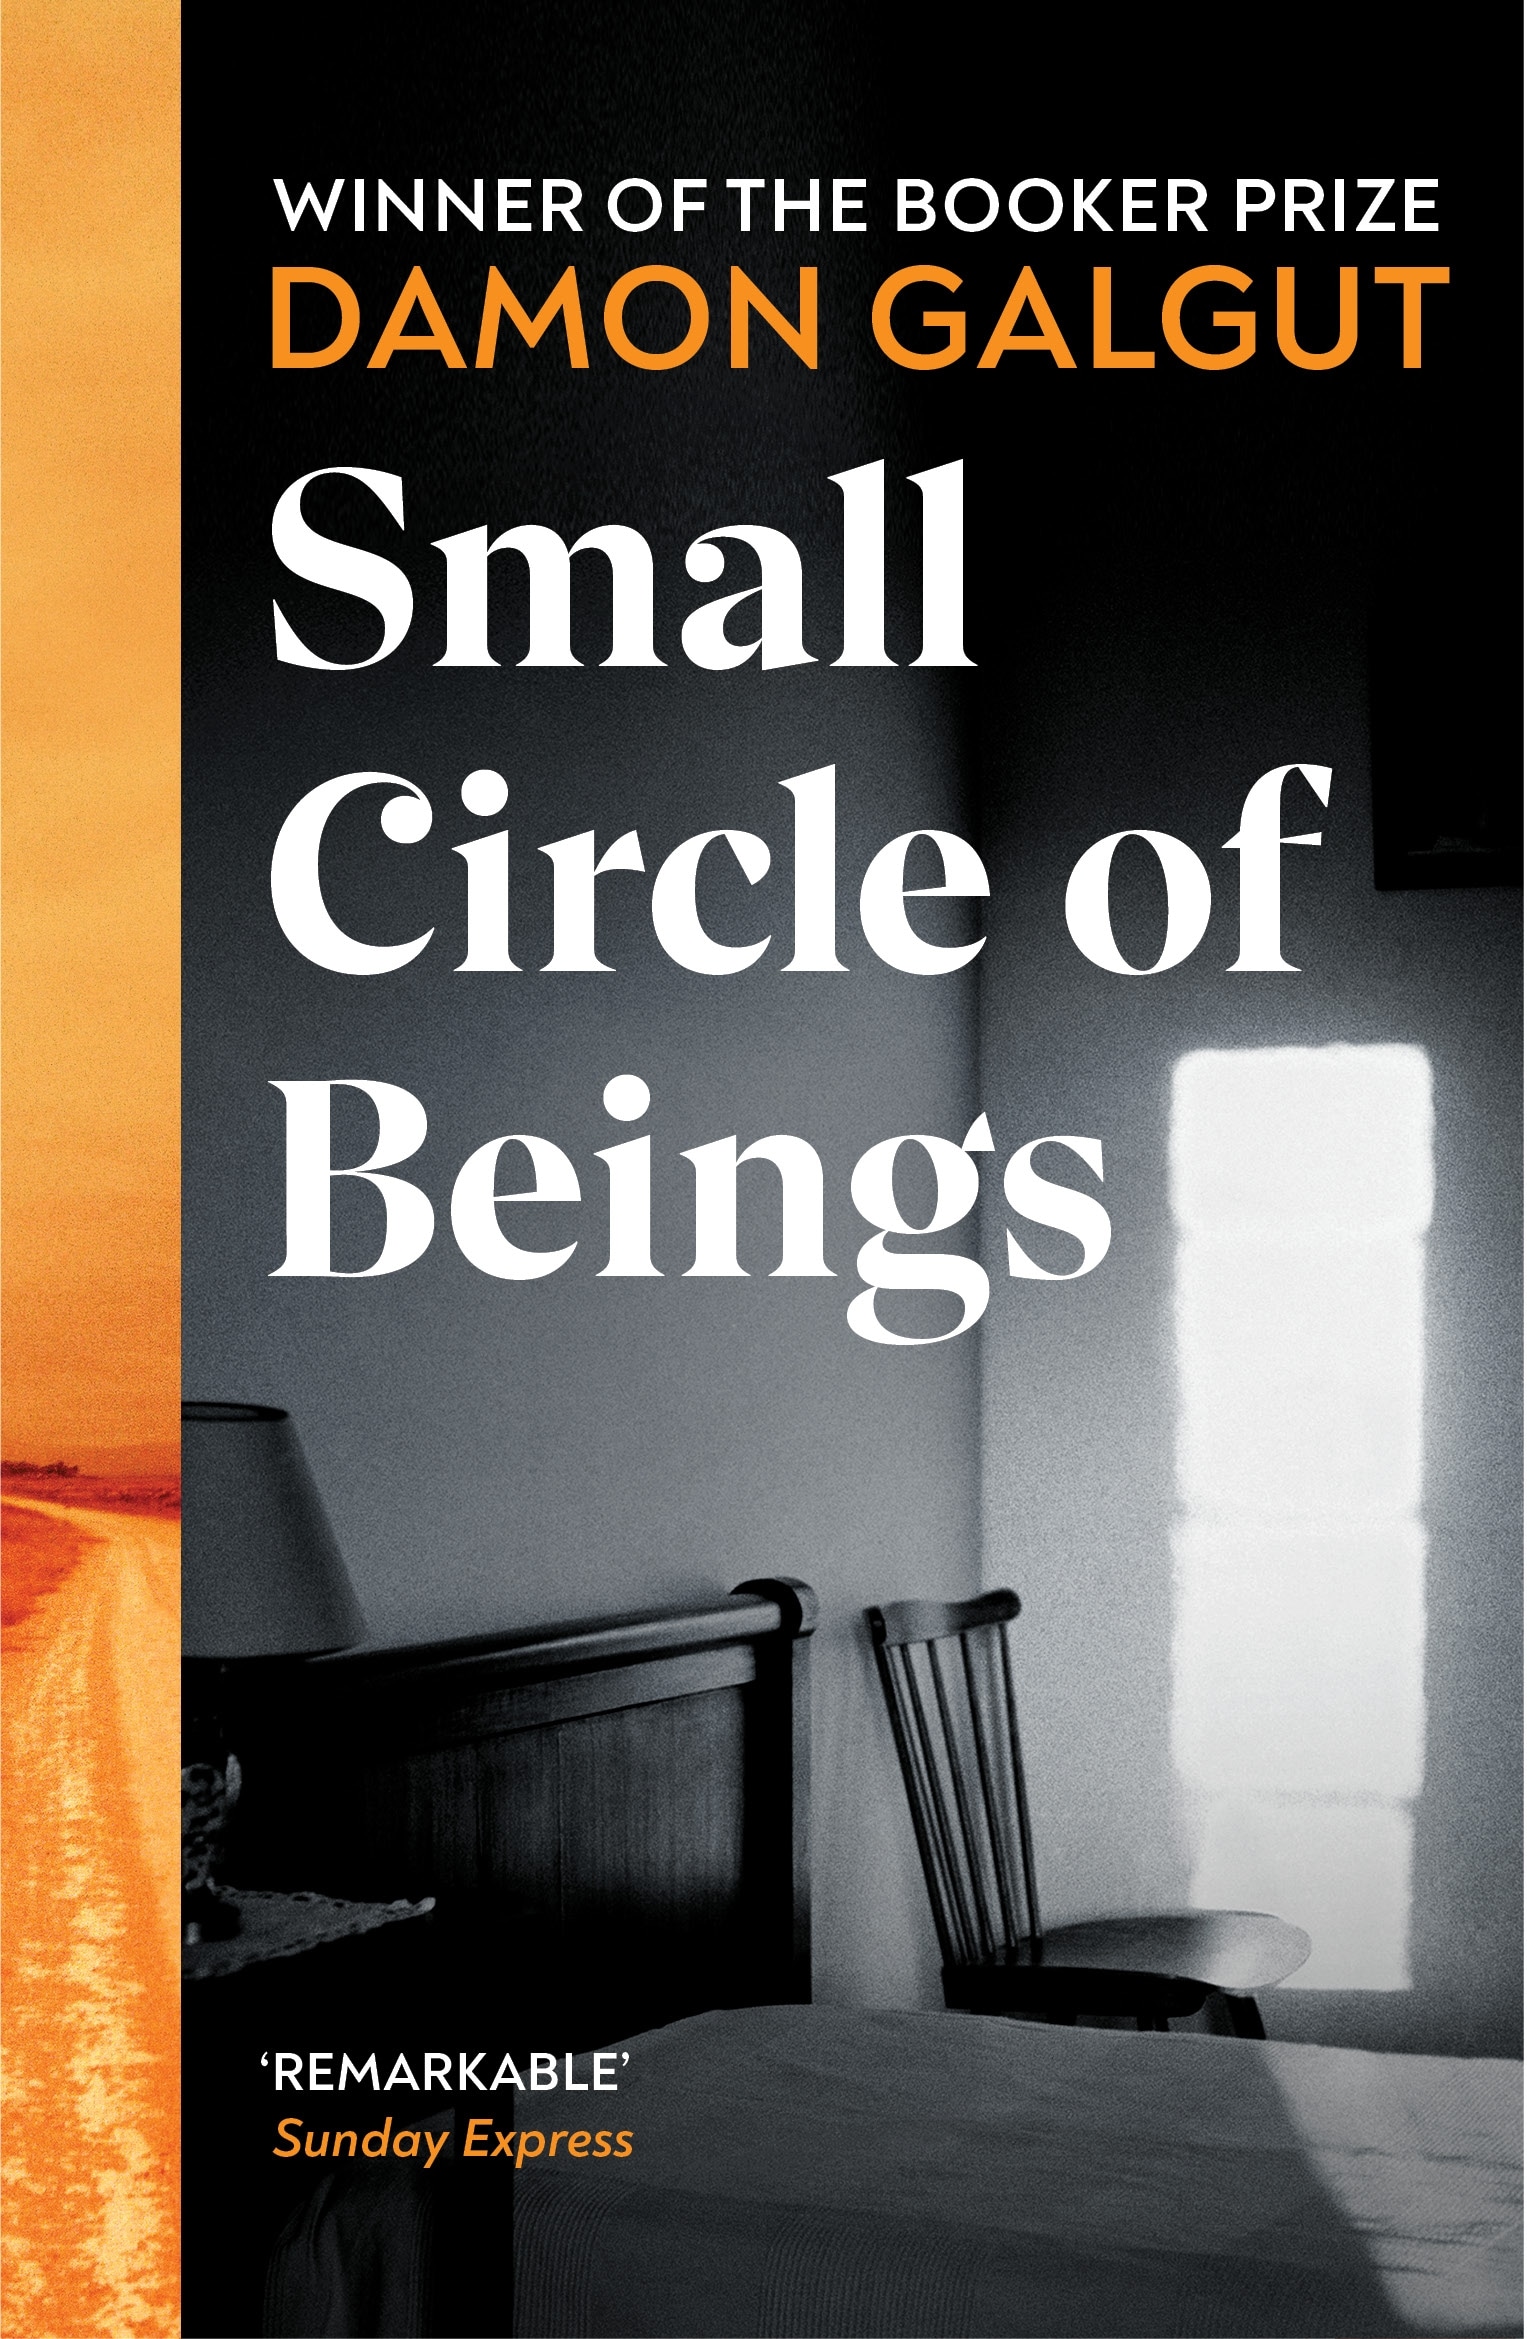 Book “Small Circle of Beings” by Damon Galgut — August 18, 2022